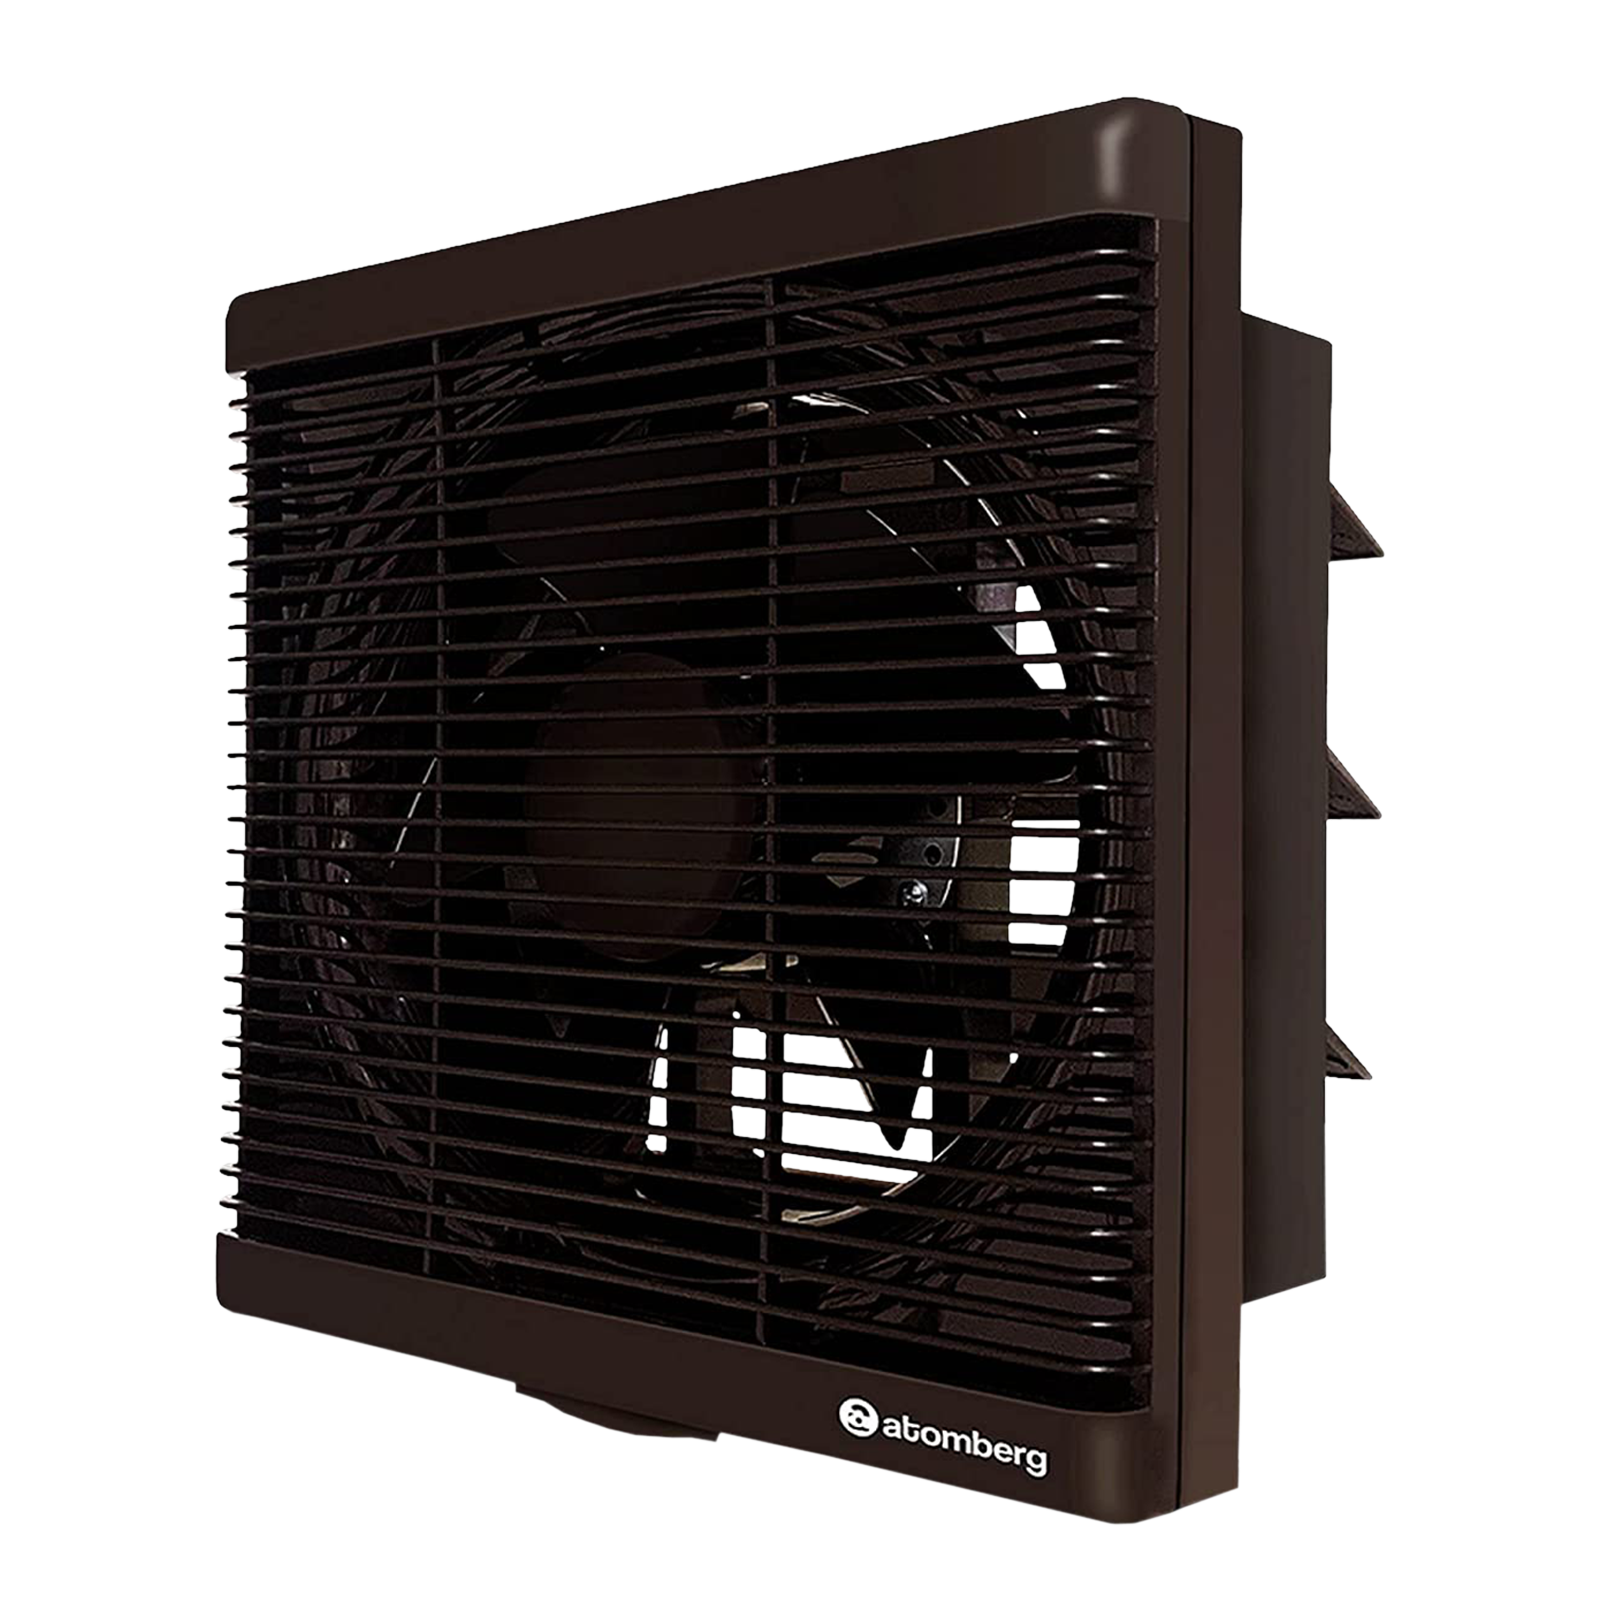 atomberg Efficio 6 Inch 150mm Exhaust Fan with BLDC Motor (Silent Operation, Umber Brown)